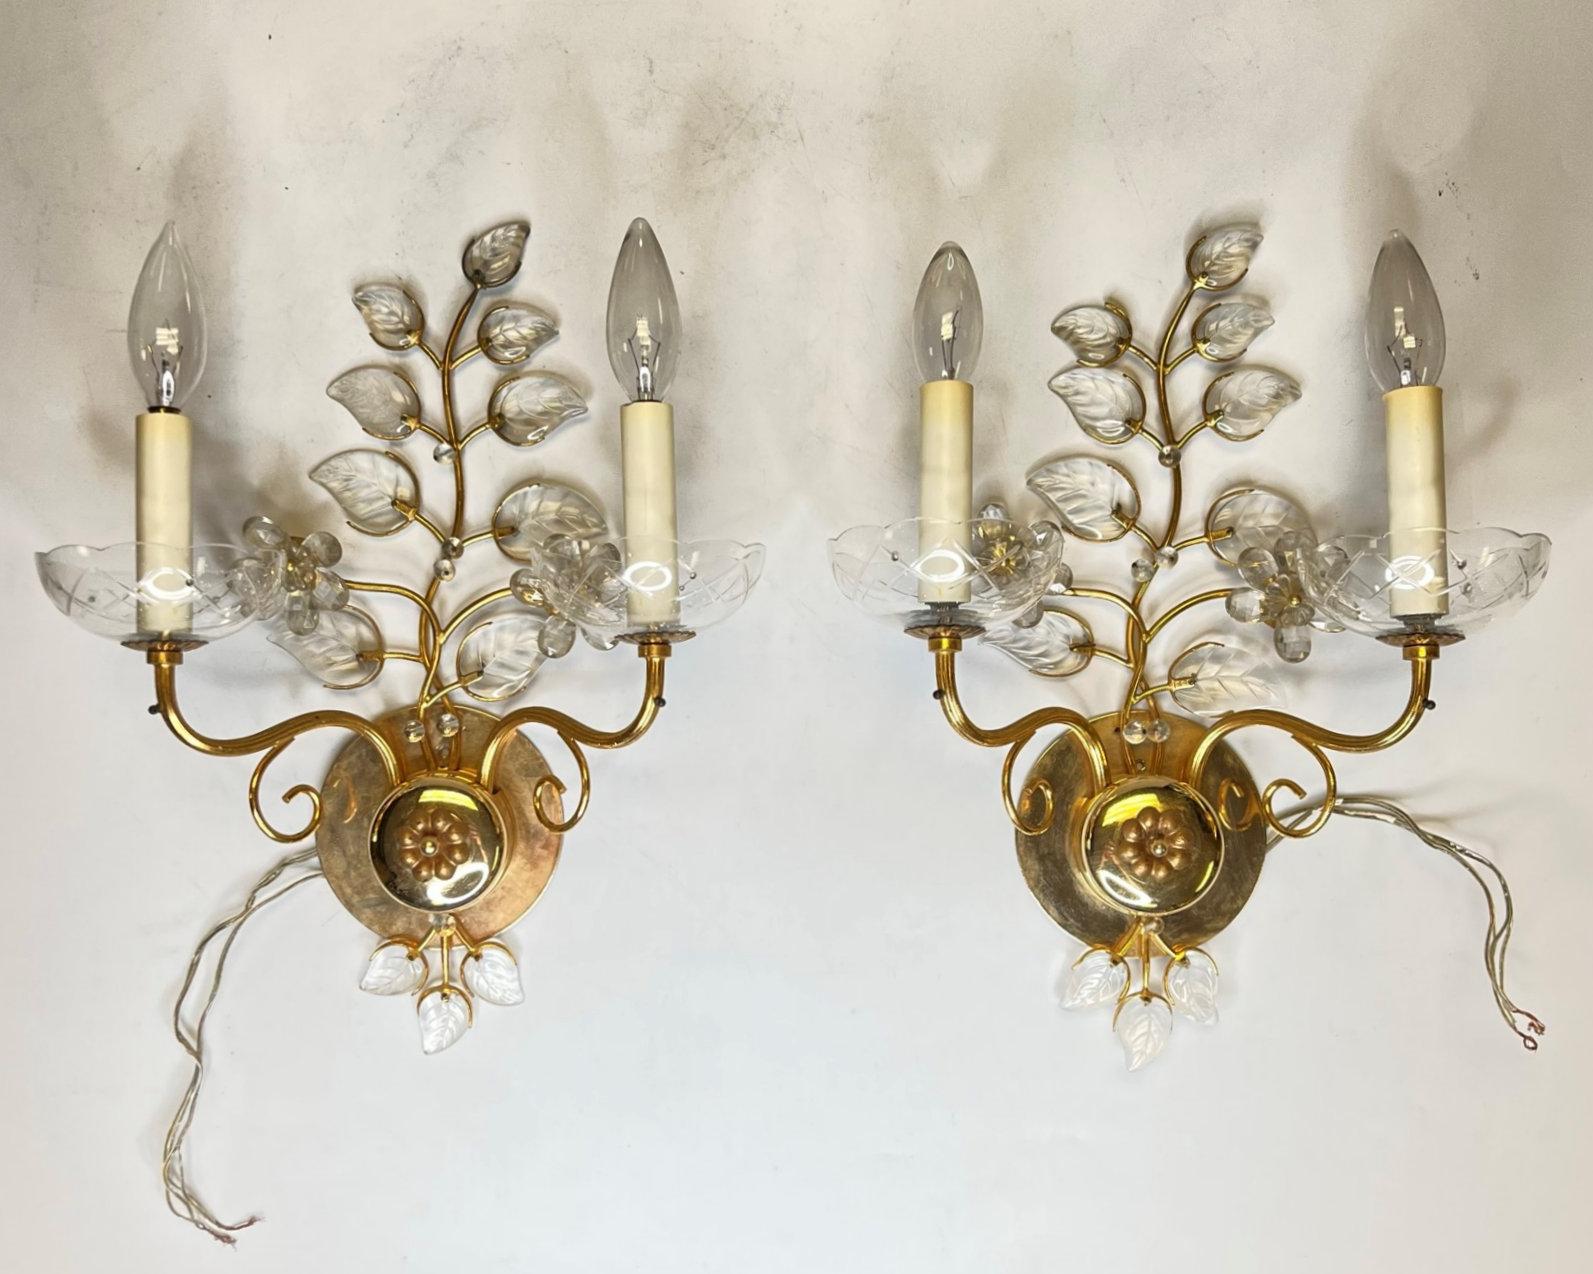 Pair of Maison Baguès style Gilt Brass and Glass Sconces.